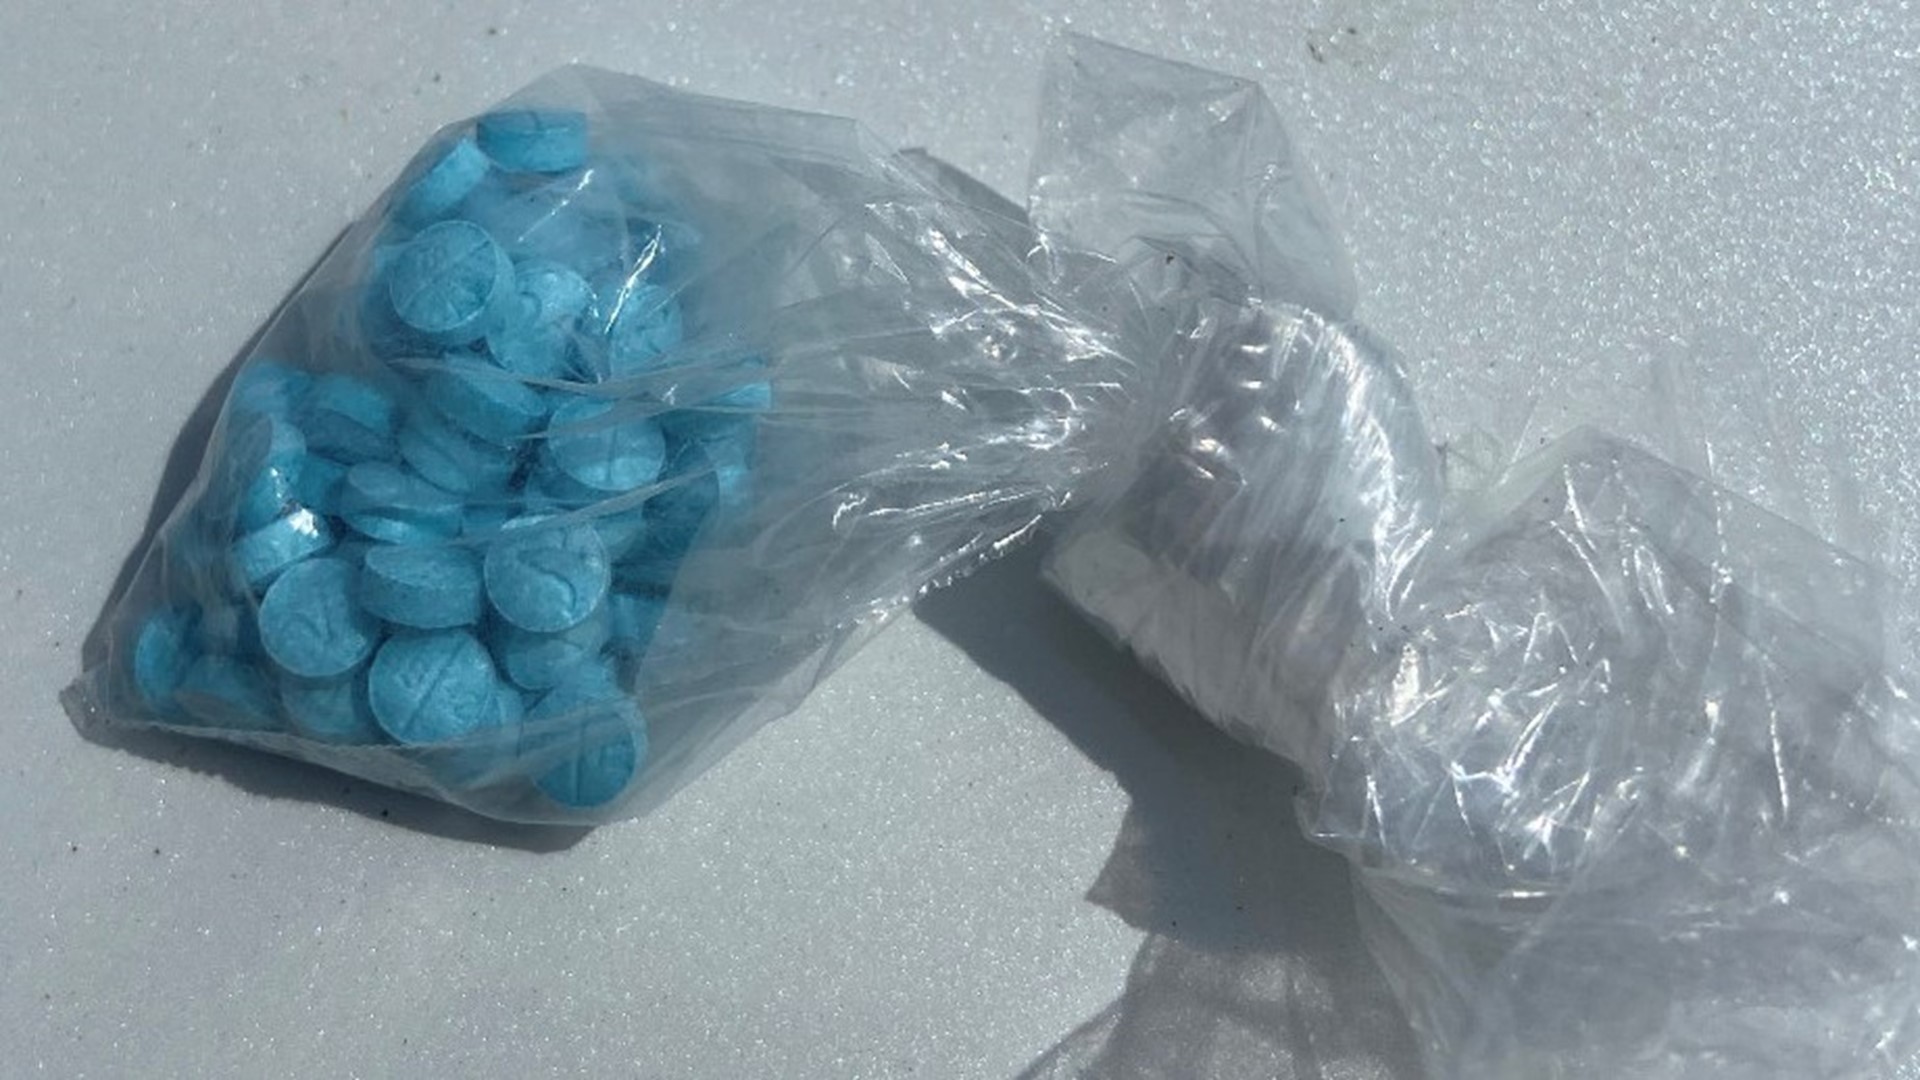 Knotted, clear plastic bag with bright blue pills inside.